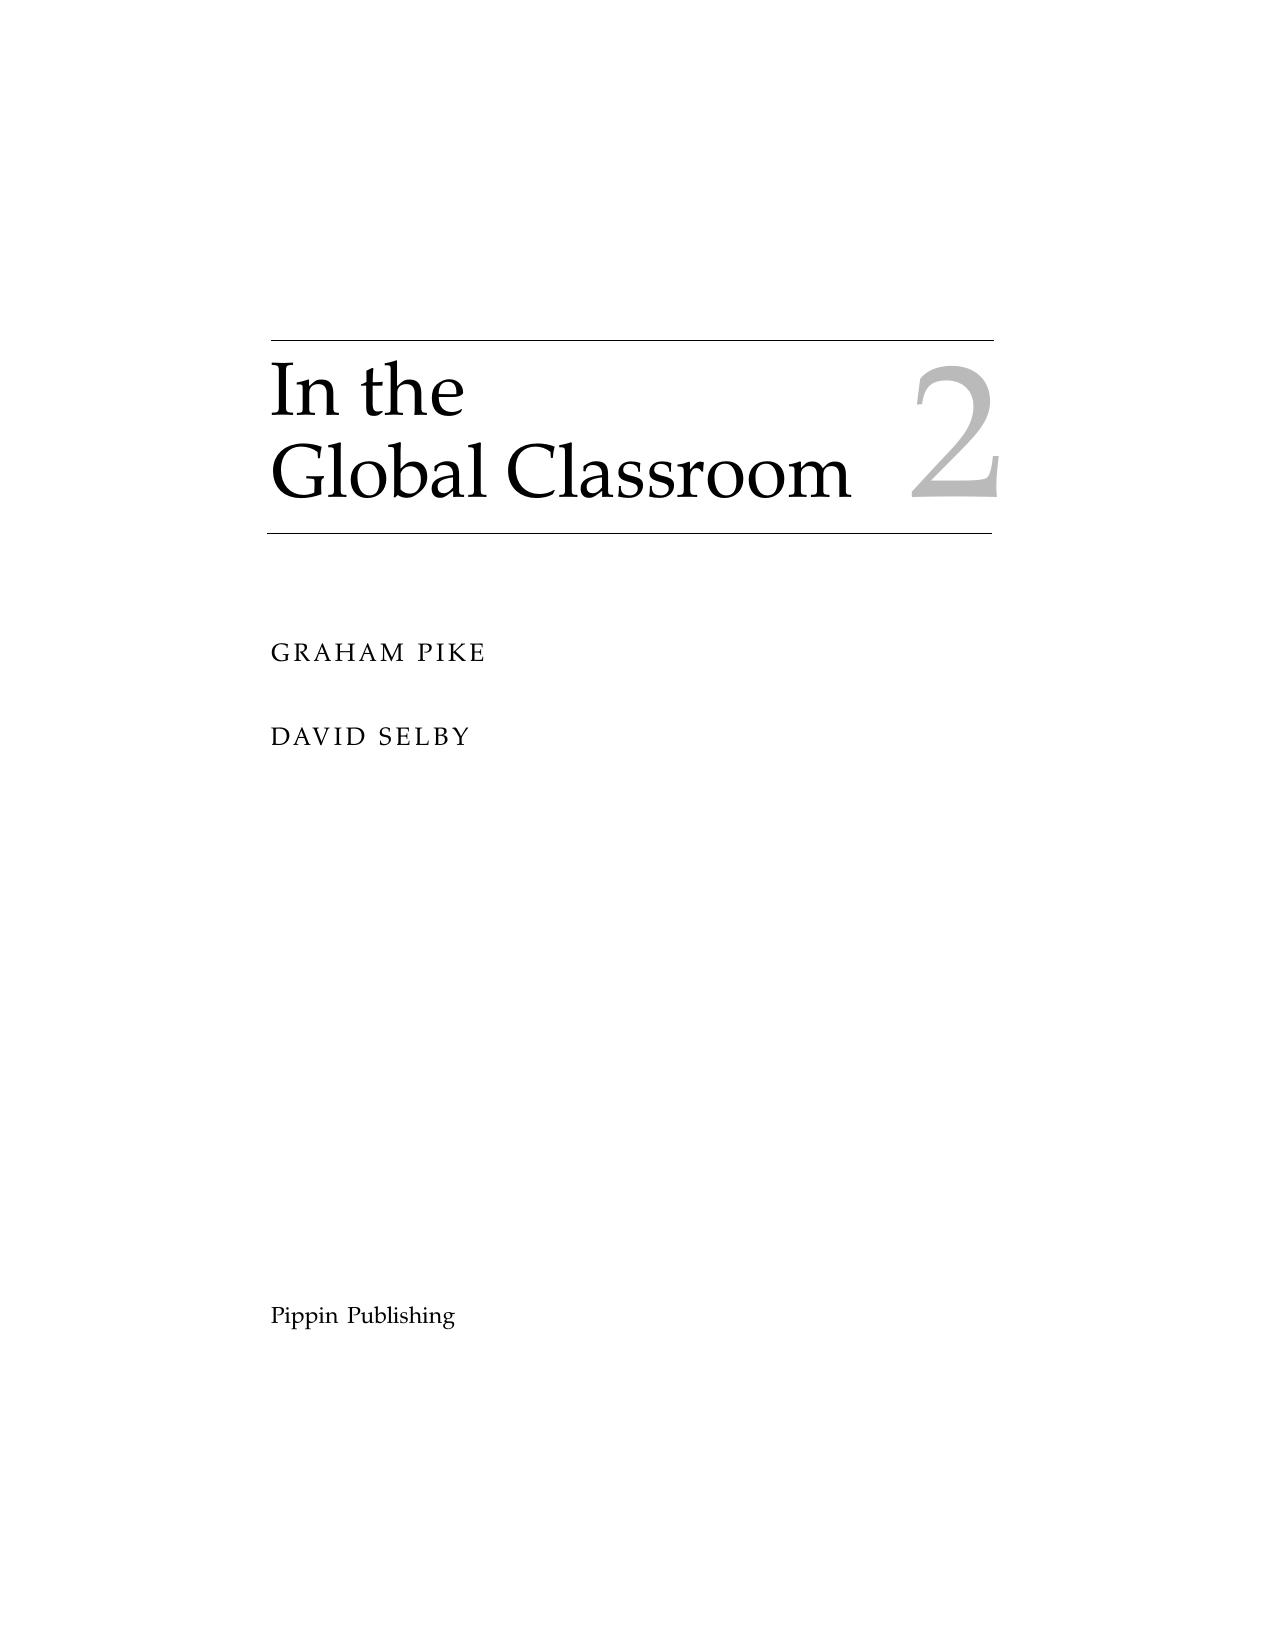 In the Global Classroom 2 by Graham Pike; David Selby